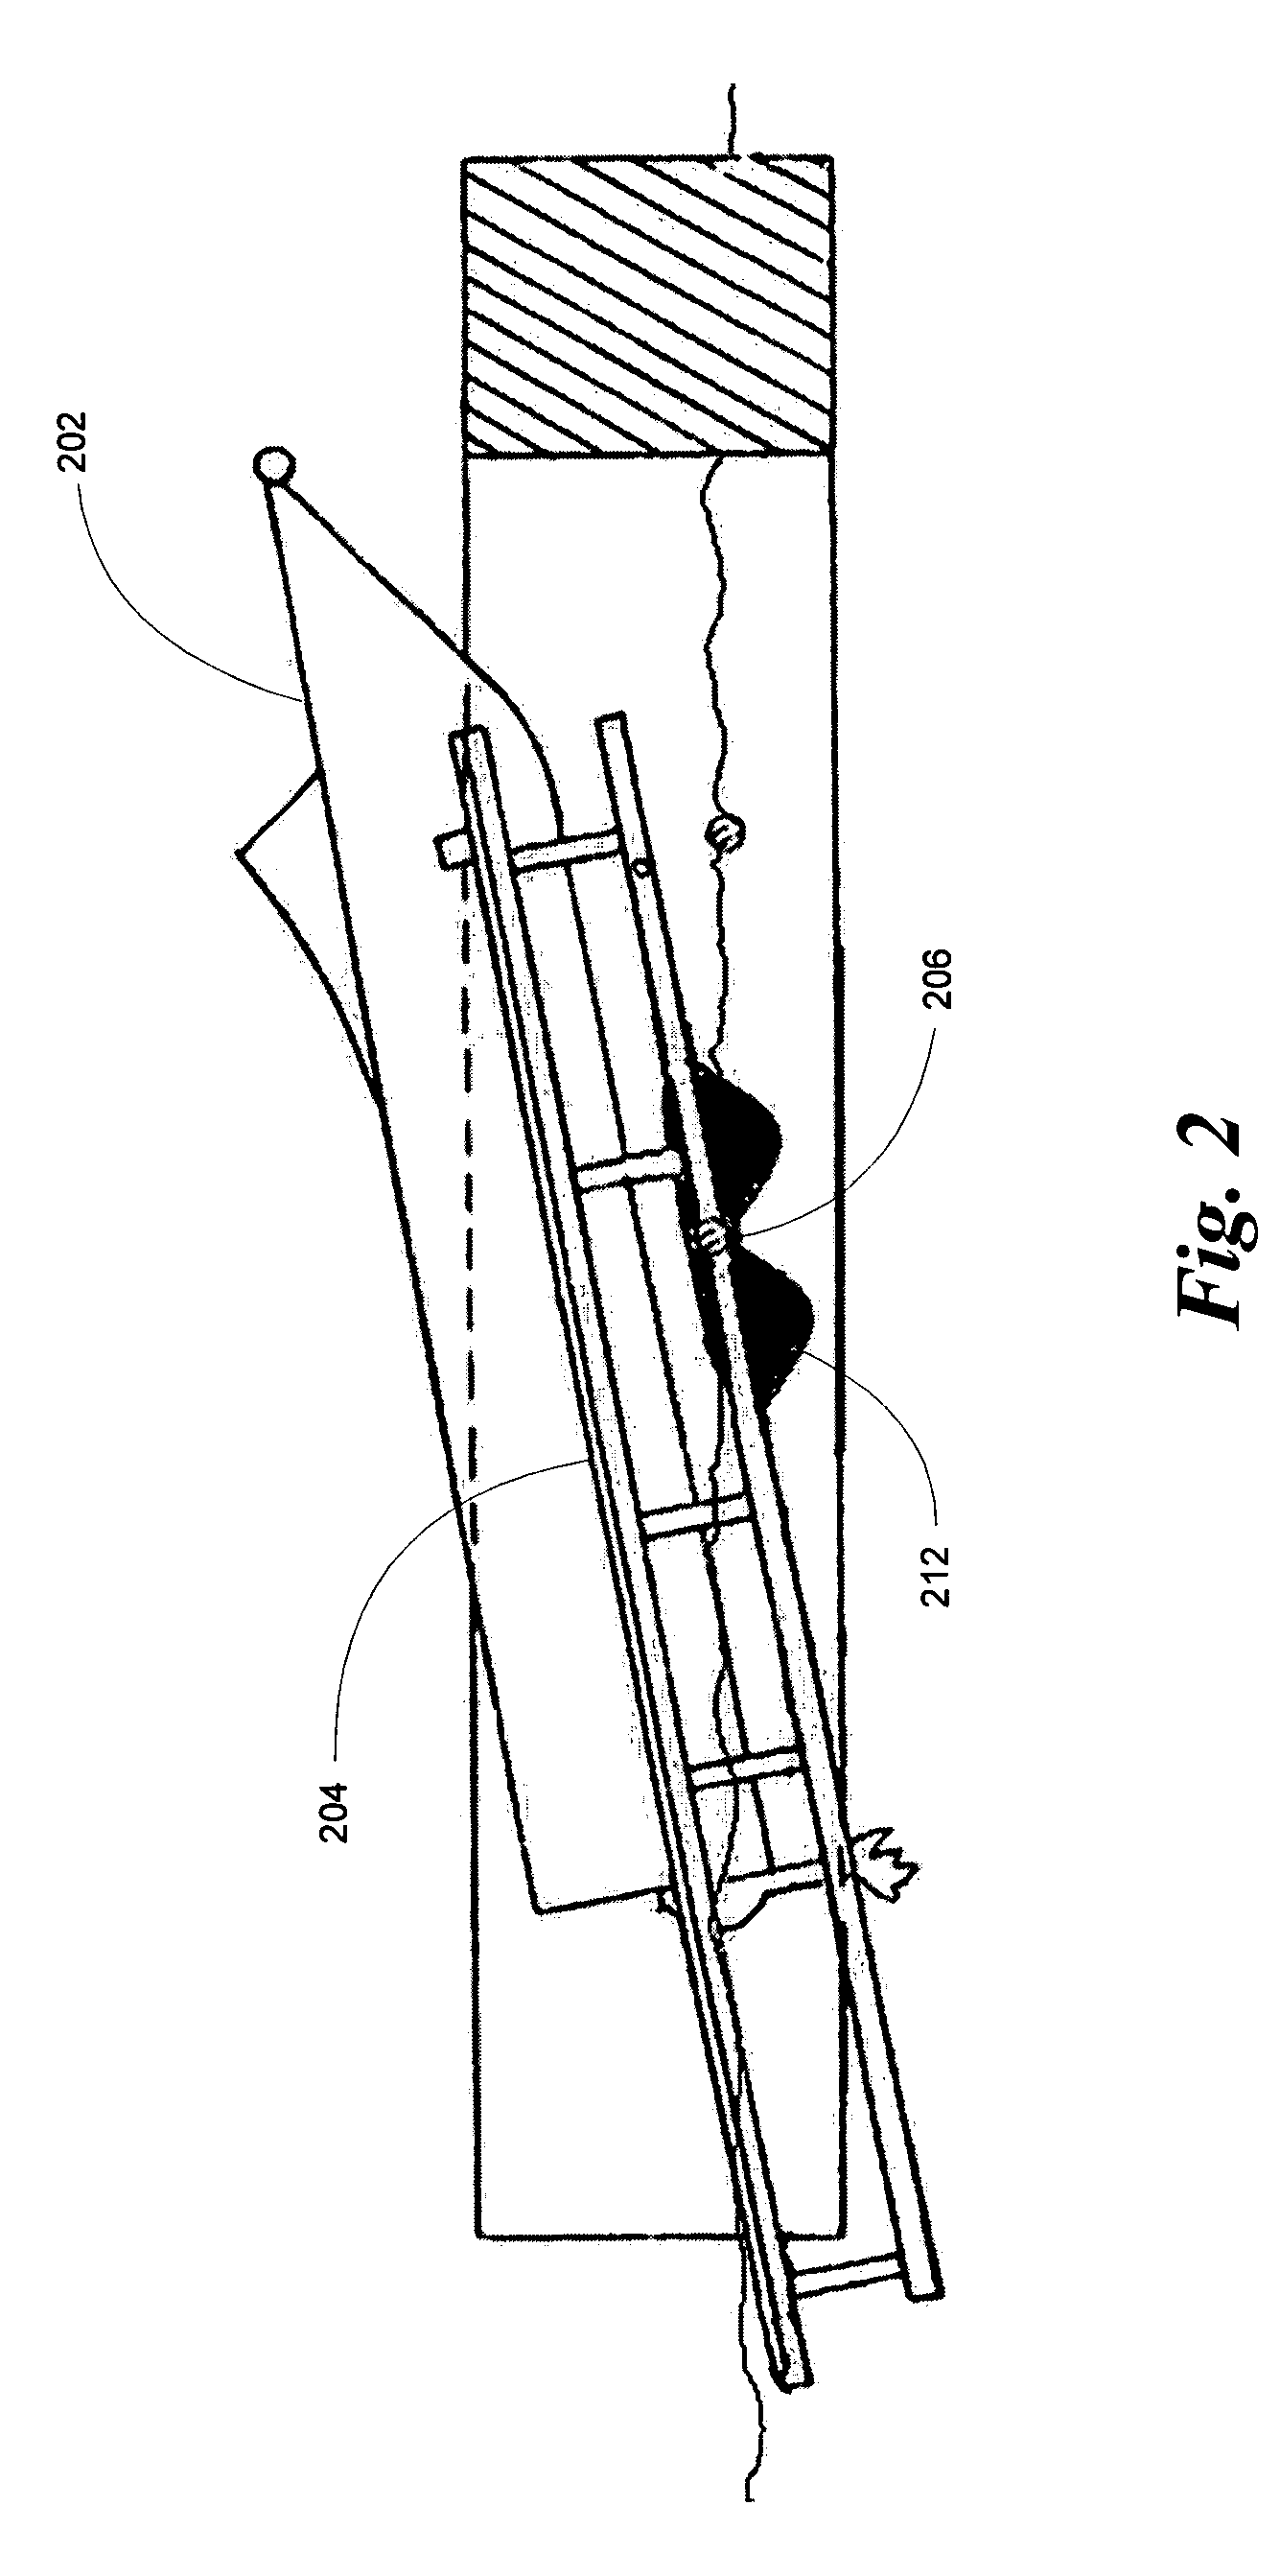 Floating drive on boat docking apparatus